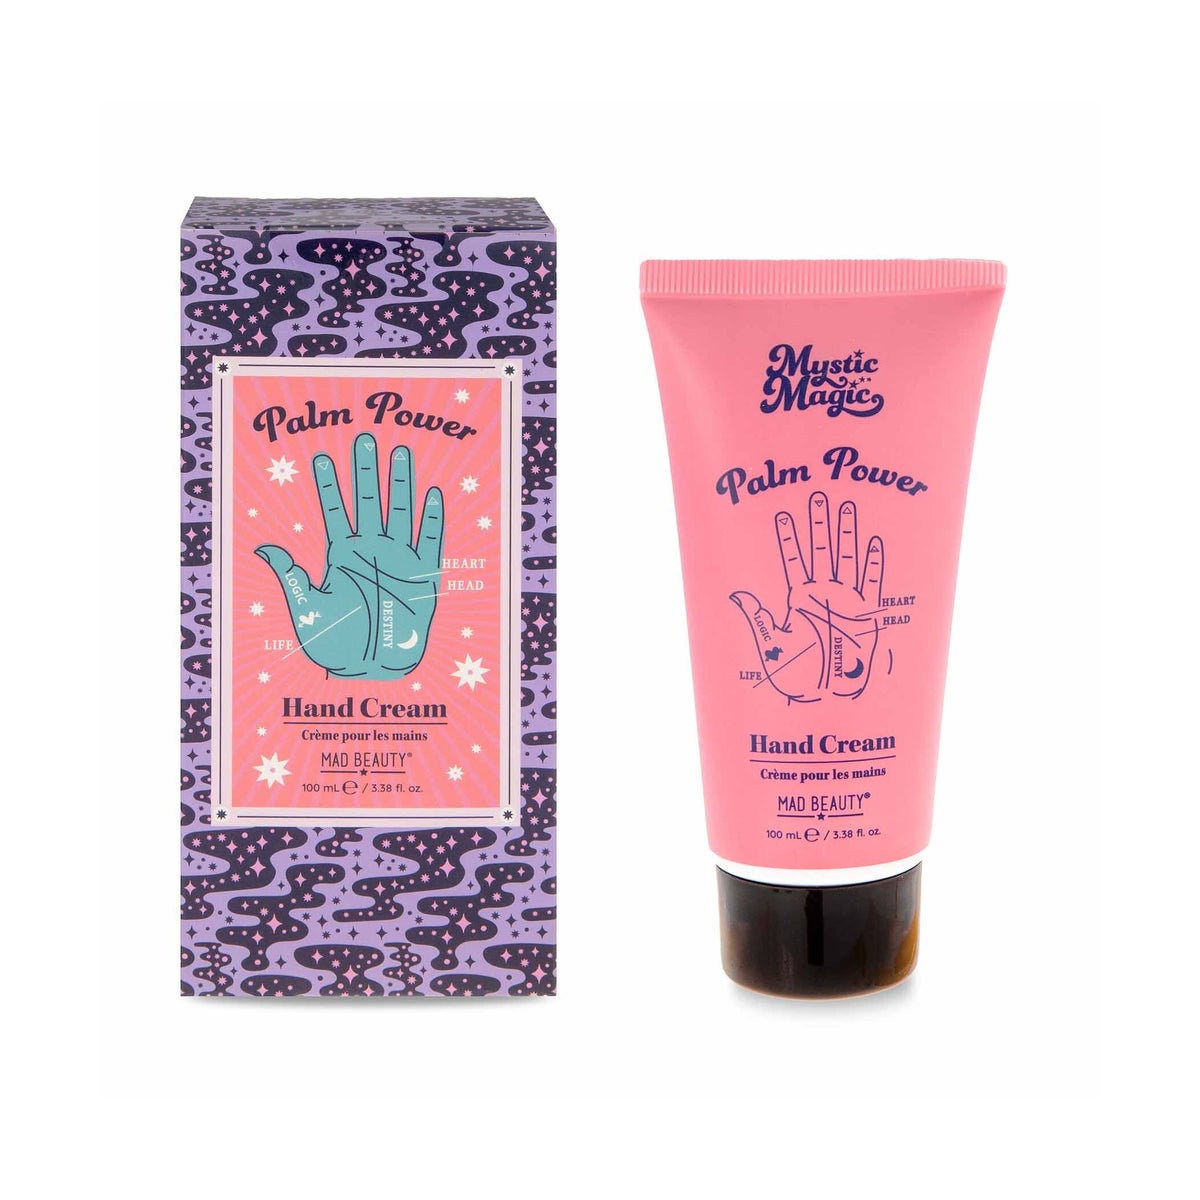 Mystic Magic - Hand Cream Palm Power - Indigo and Violet, enriched with Shea Butter